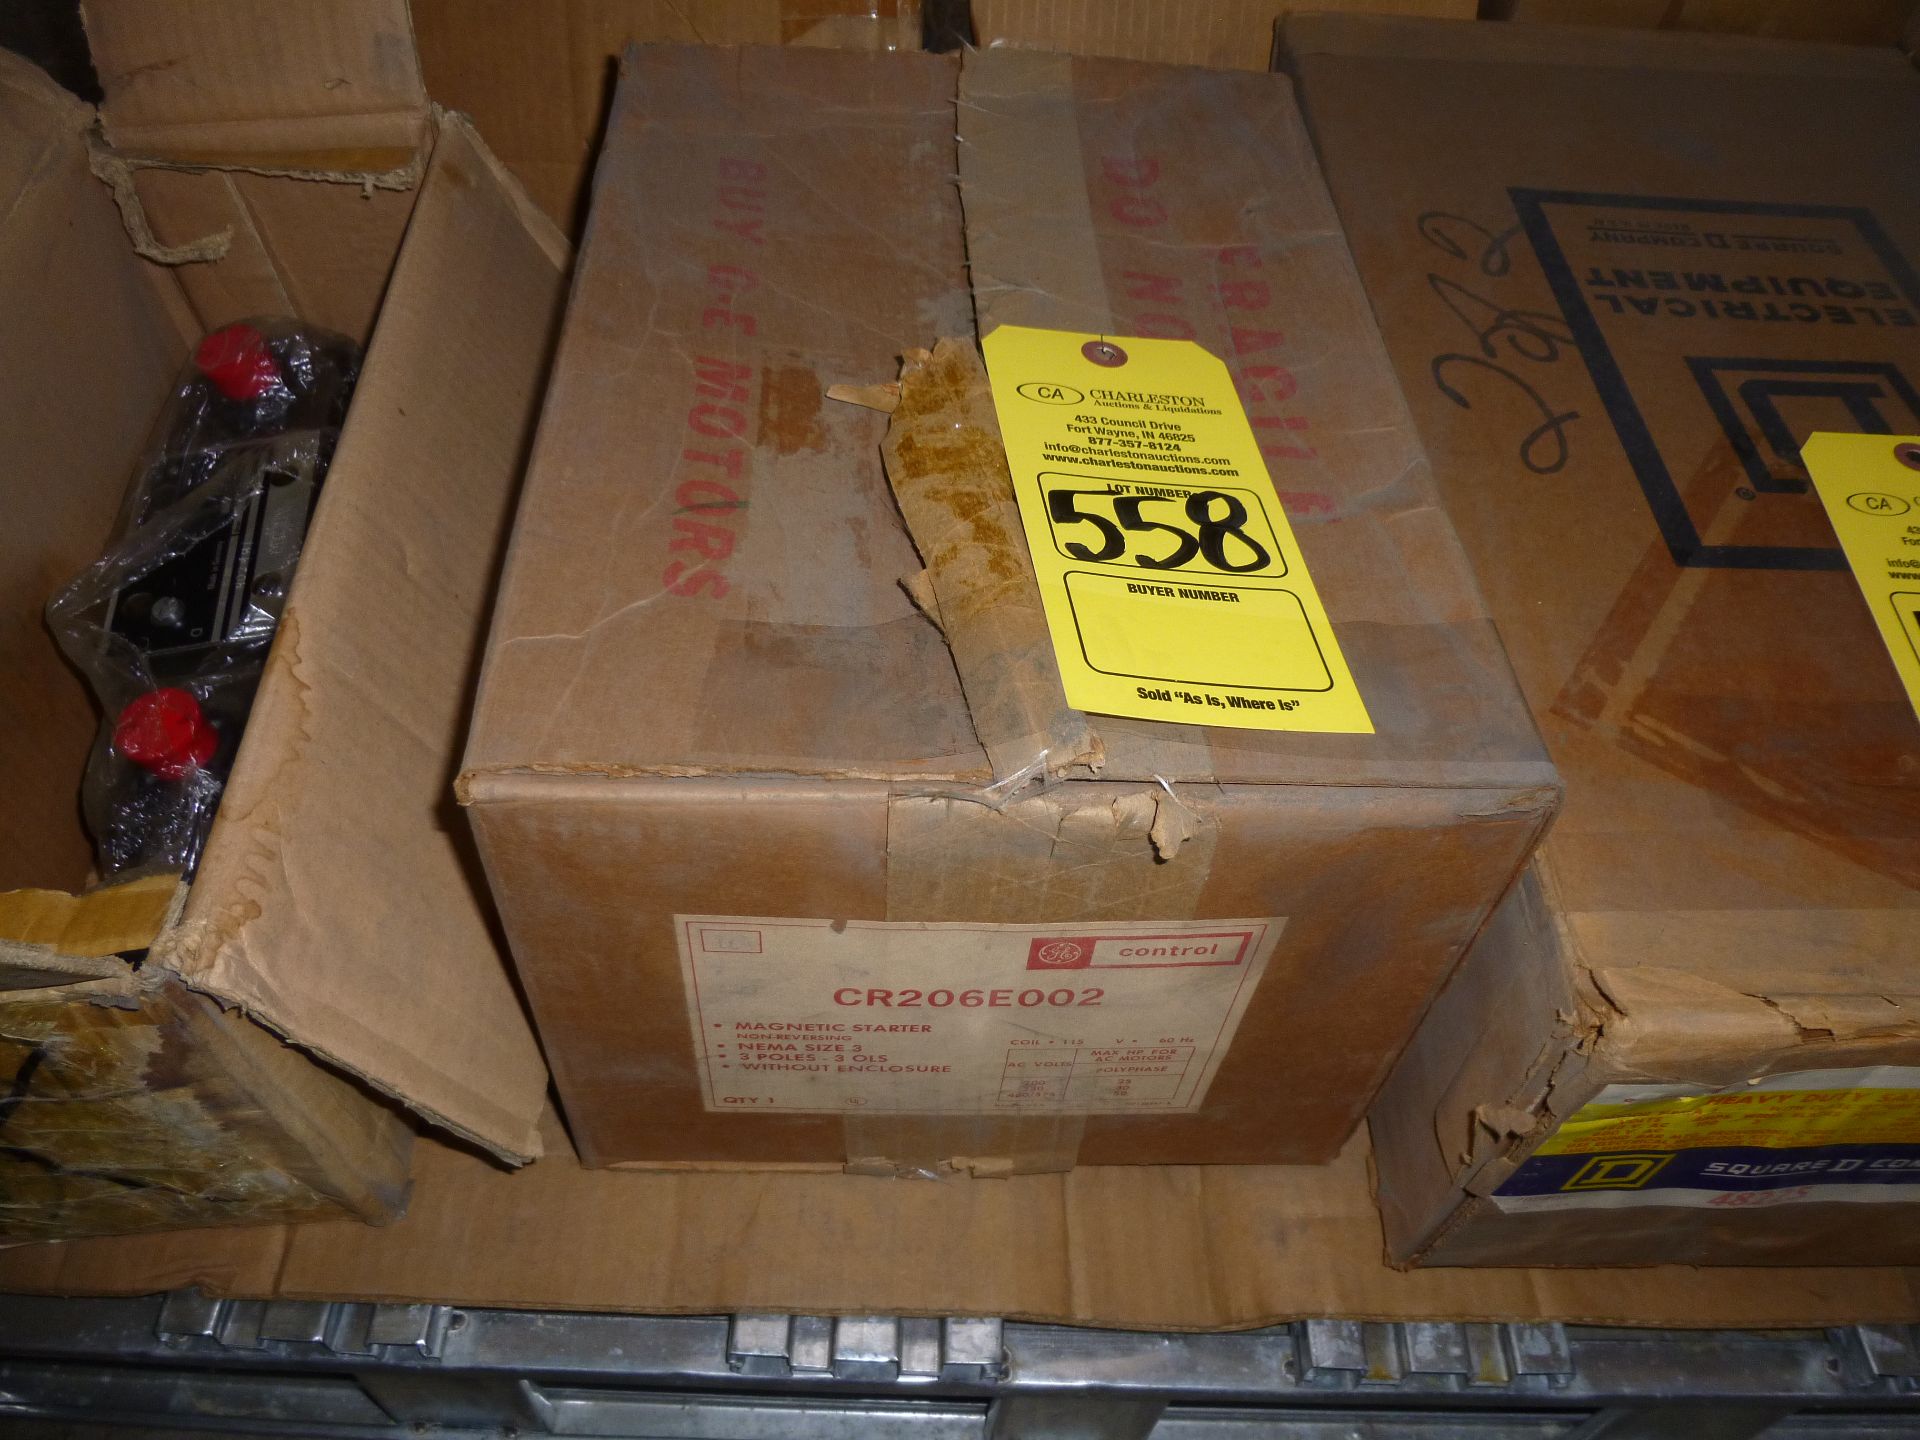 GE Controls Model CR206E002, new in box, as always with Brolyn LLC auctions, all lots can be